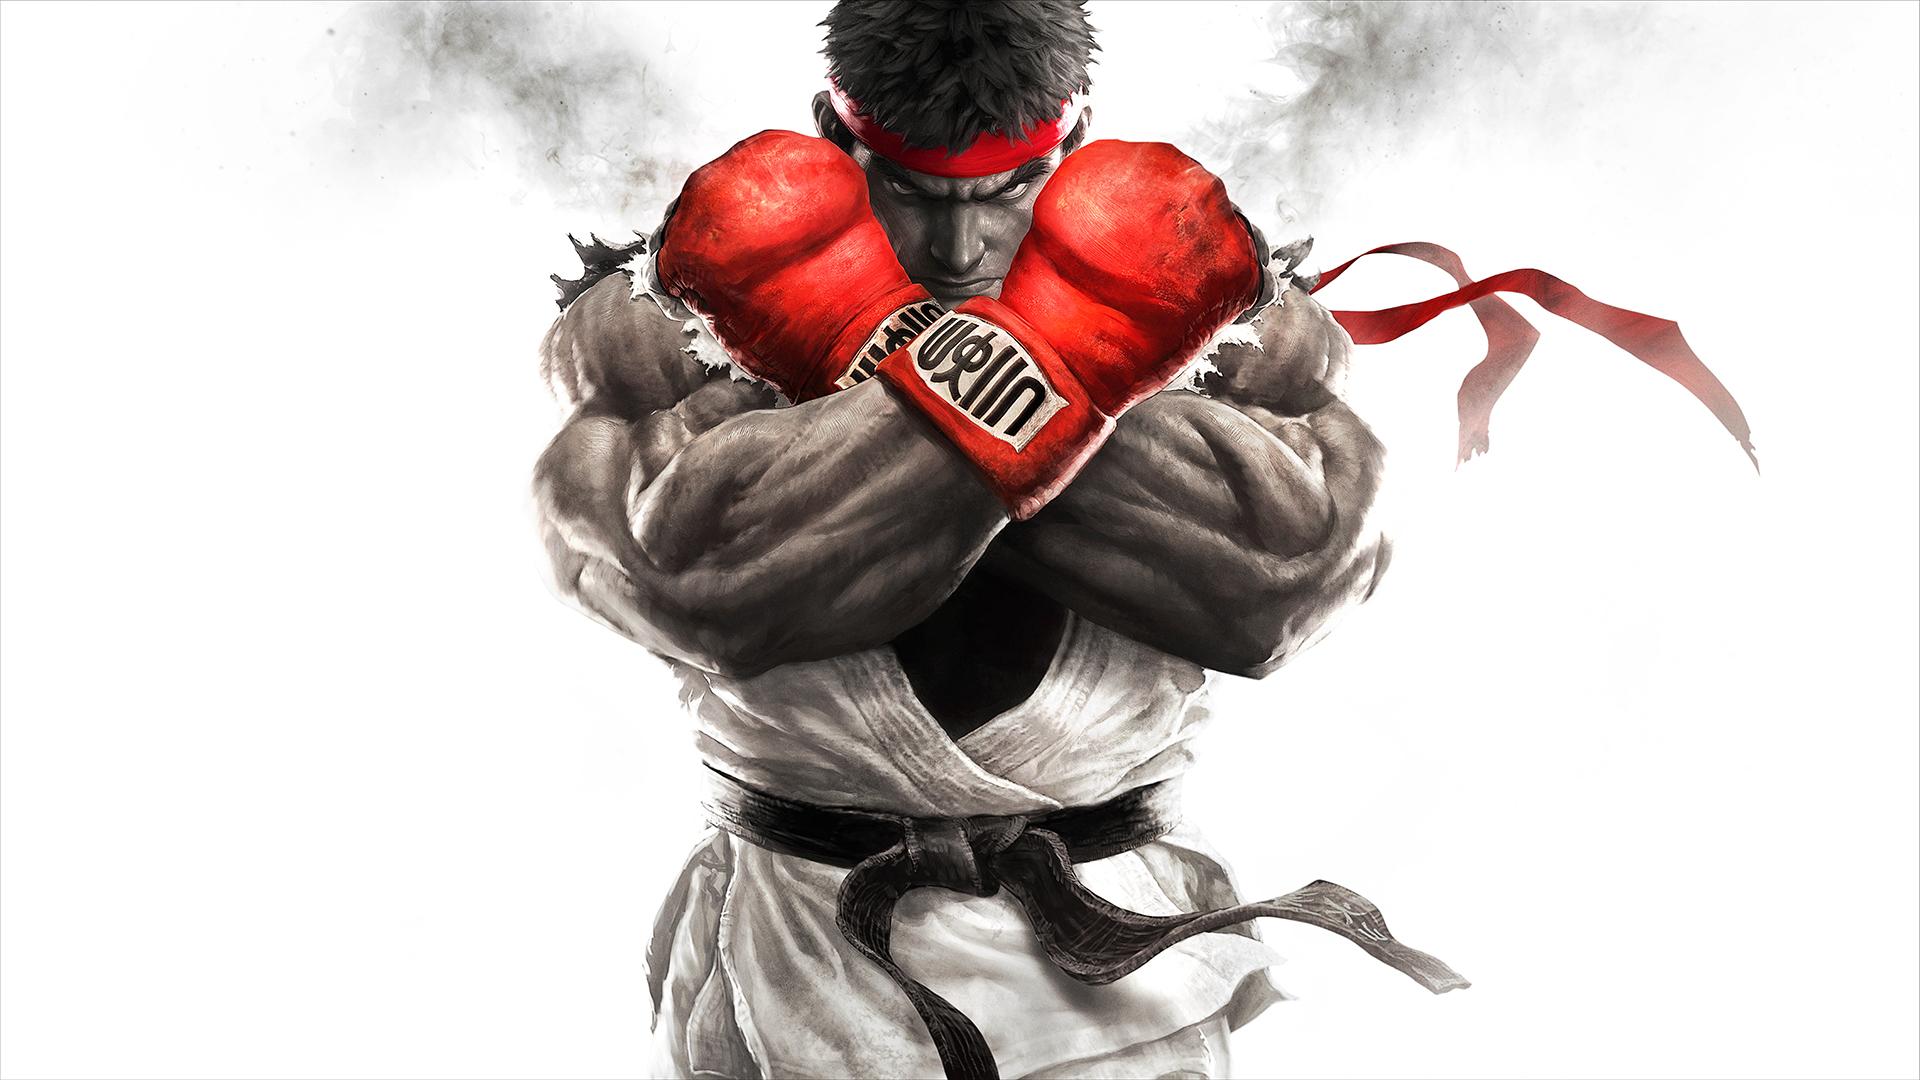 Street Fighter V Backgrounds, Compatible - PC, Mobile, Gadgets| 1920x1080 px